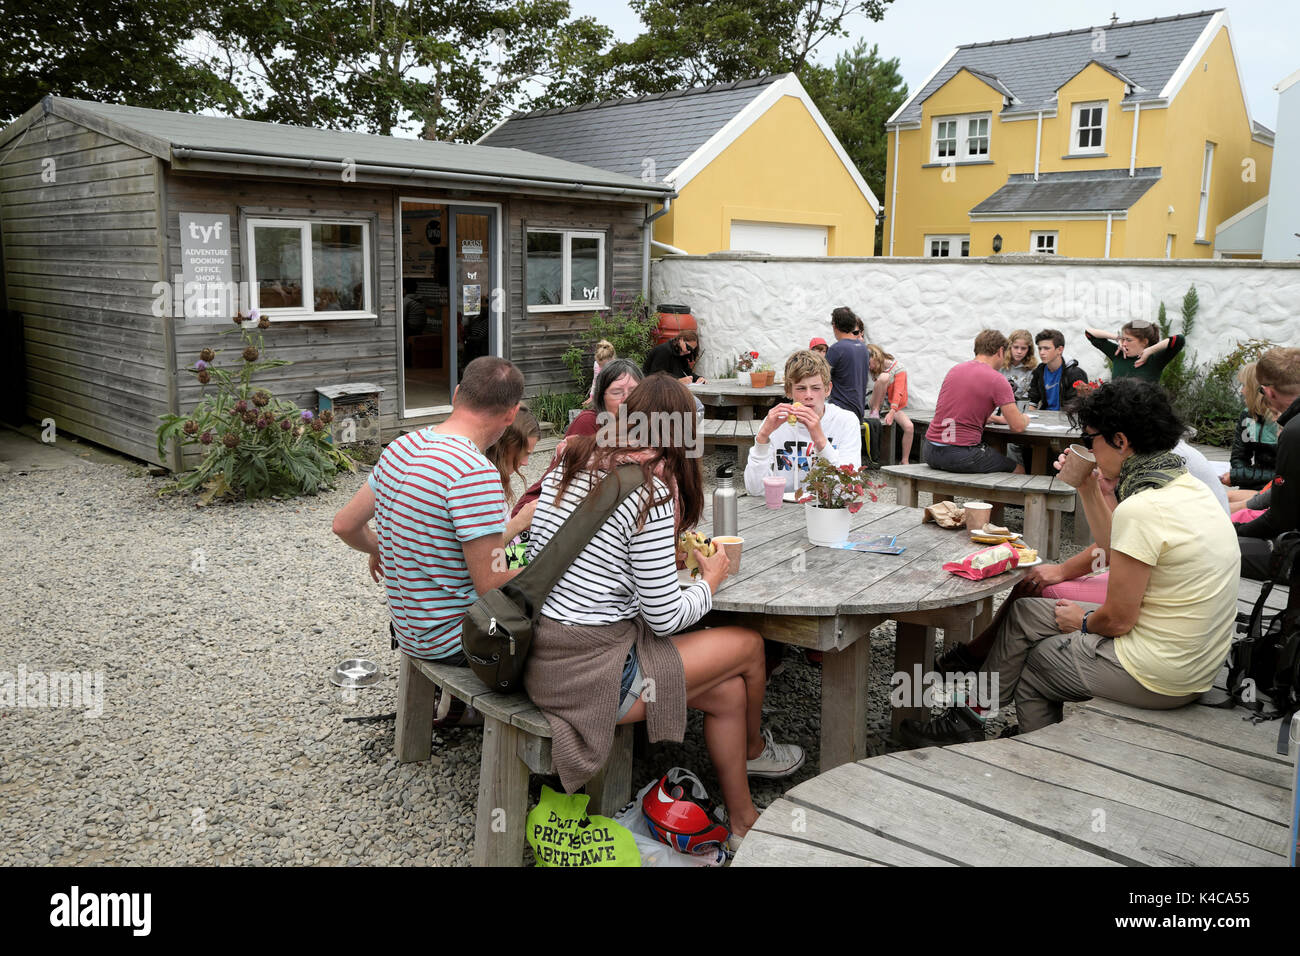 Group of people sitting at table outside Tyf Adventure Centre in St Davids Pembrokeshire Wales UK  KATHY DEWITT Stock Photo